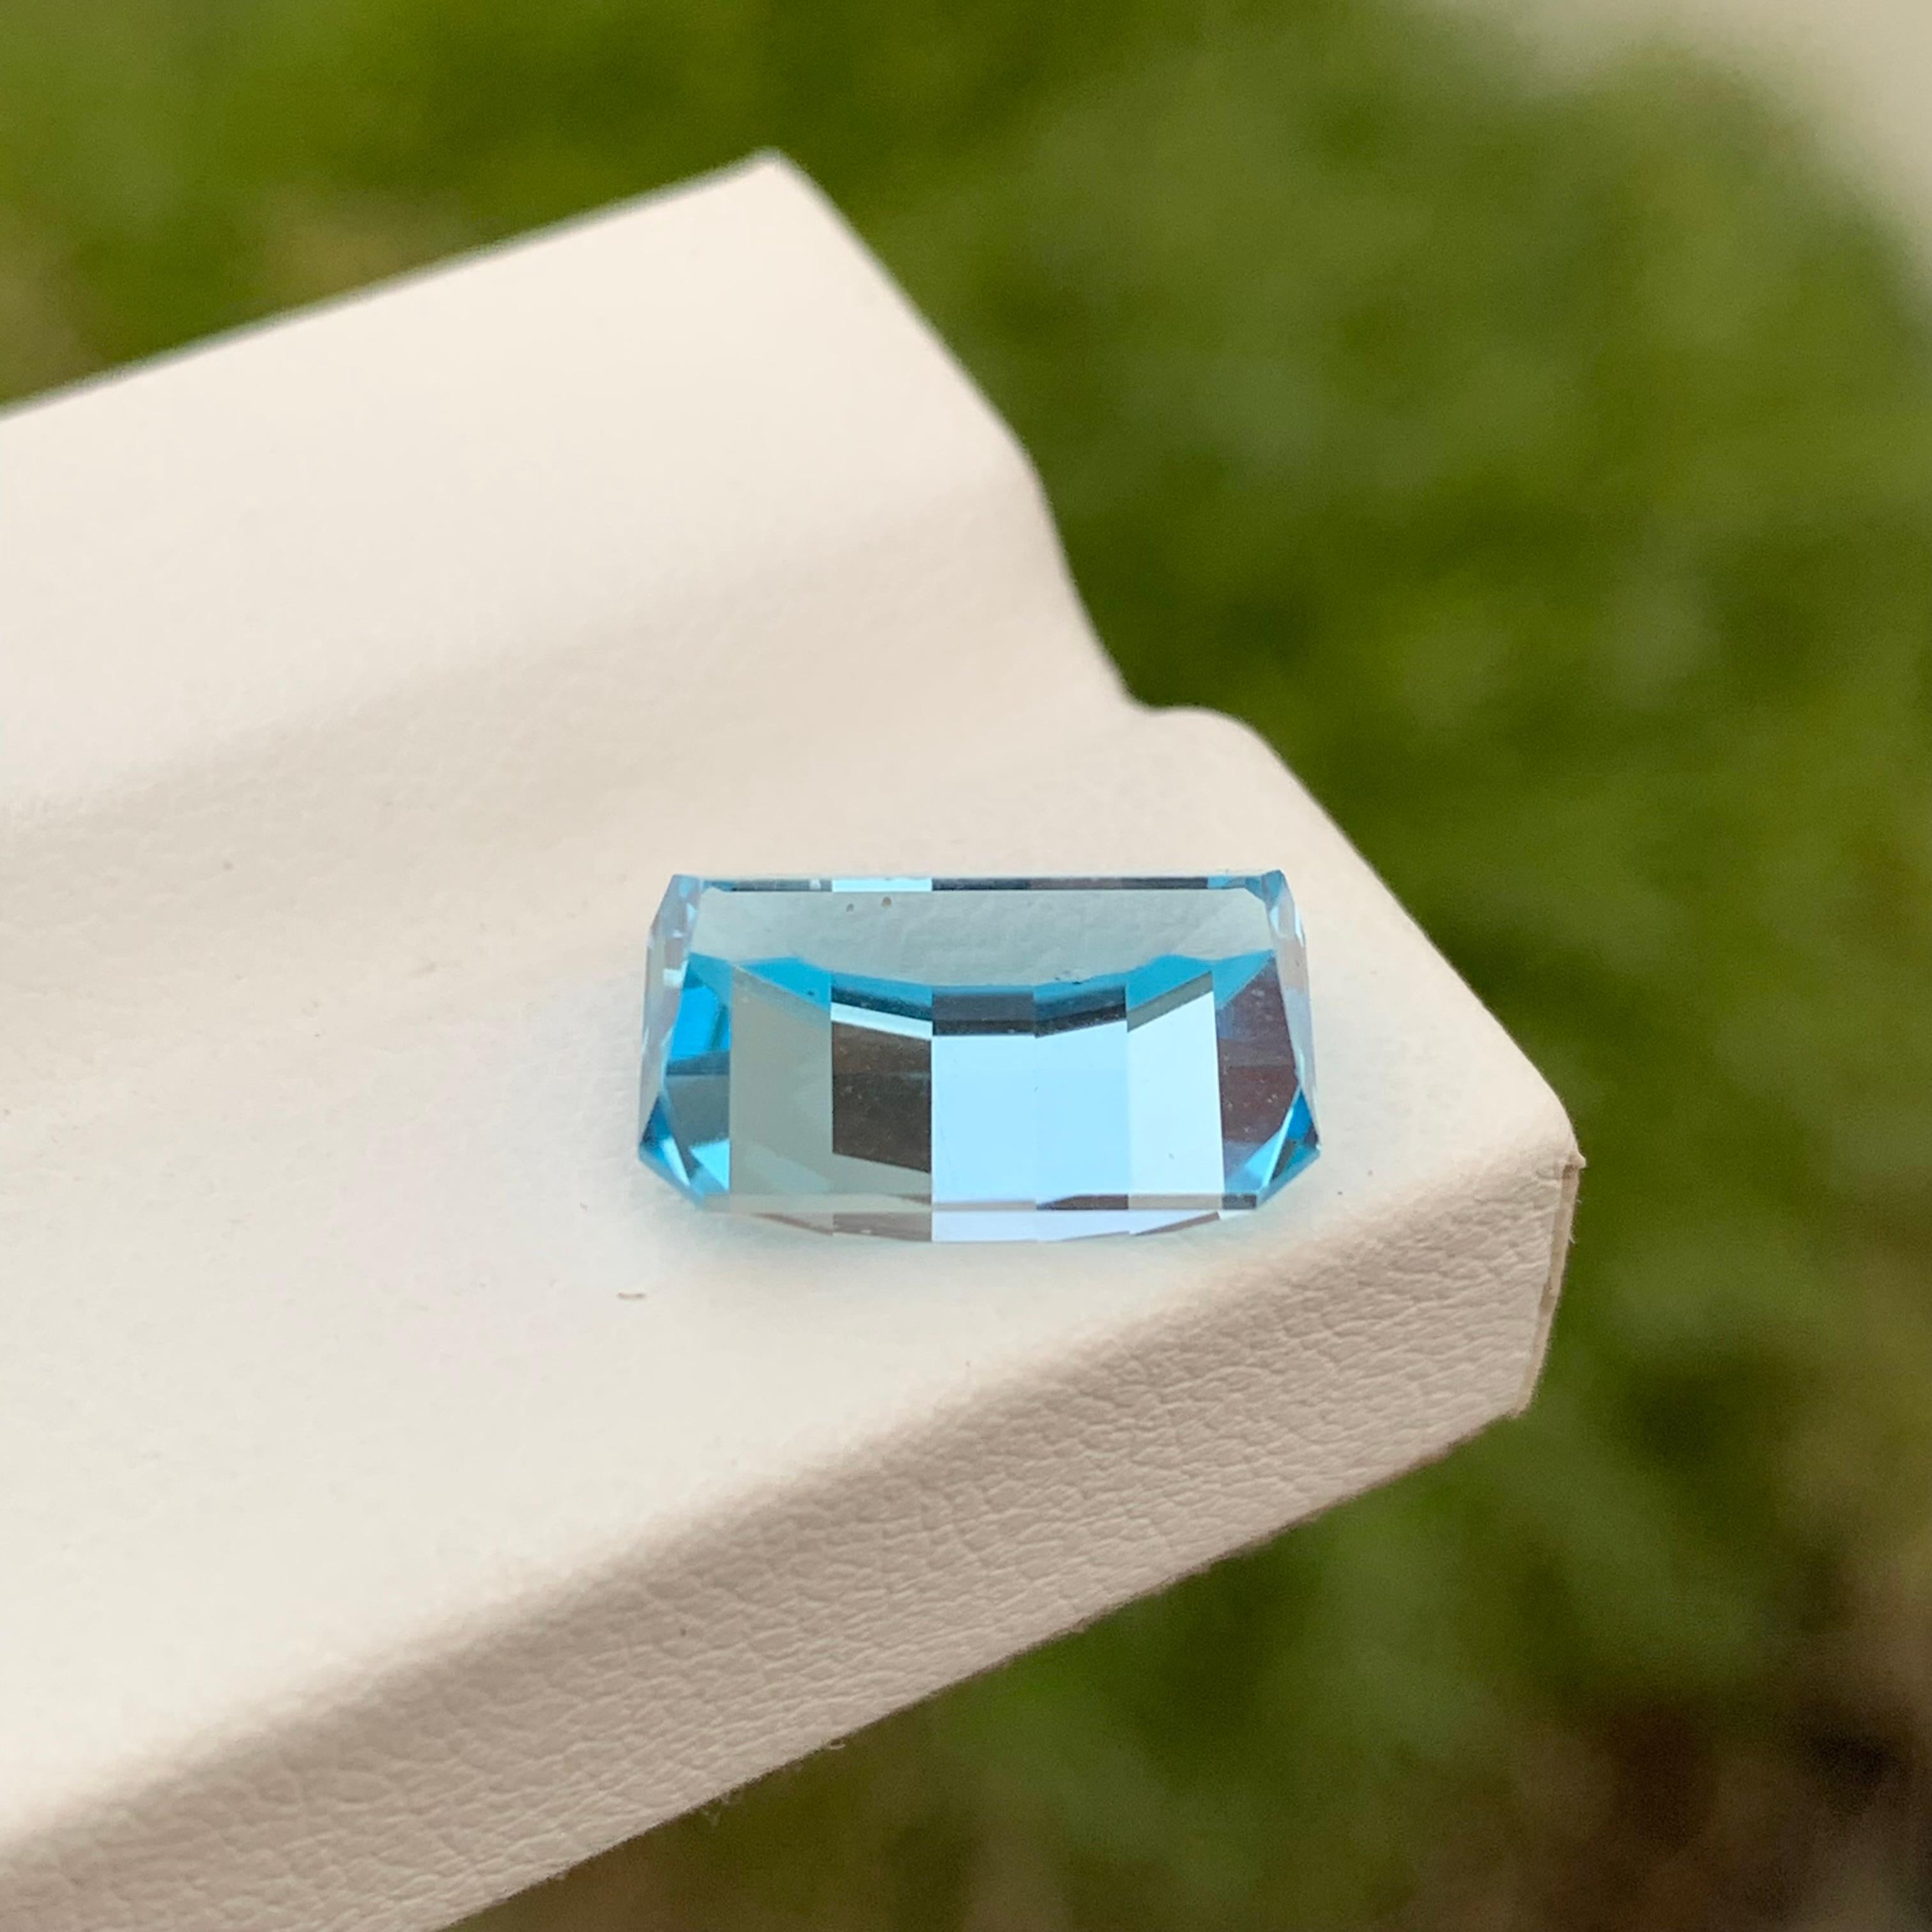 Loose Sky Blue Topaz
Weight: 6.15 Carats 
Dimension: 12.6x7.8x6.1 Mm
Origin: Brazil
Shape: Emerald Bar Cut
Treatment: Non
Color; Blue 
Certificate; On Demand
Sky Blue Topaz, a radiant gemstone that mirrors the clear and tranquil hues of the sky, has